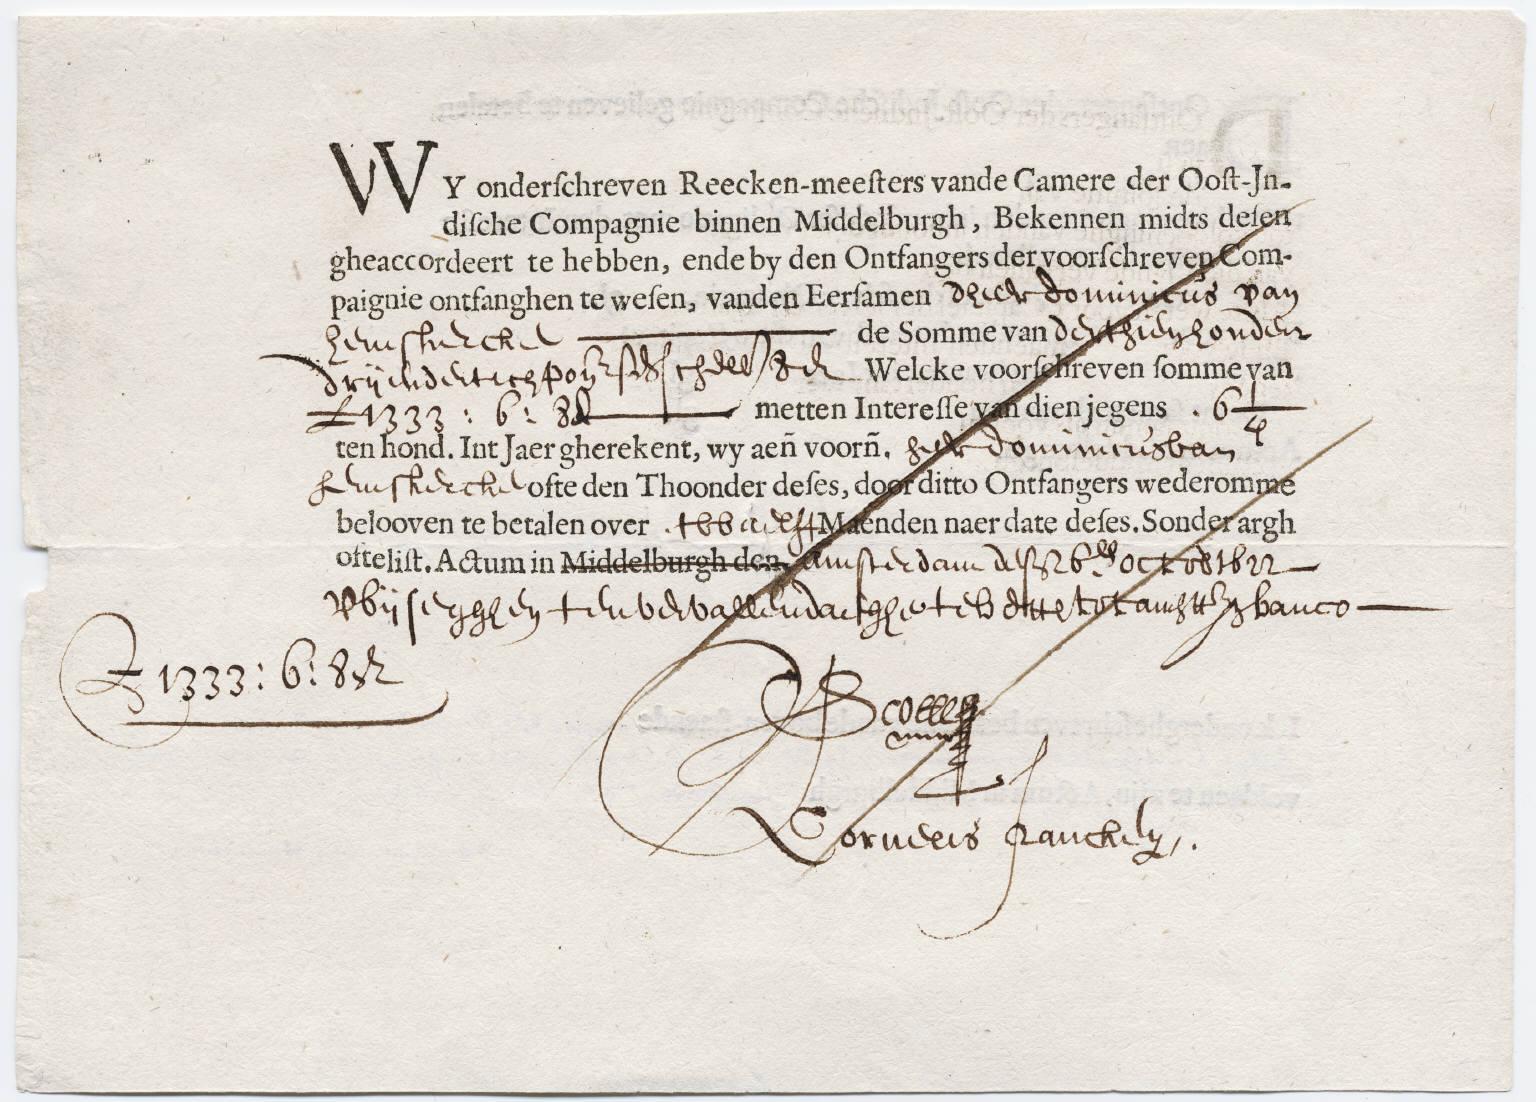 a bond issued by the Dutch East India Company in 1623.